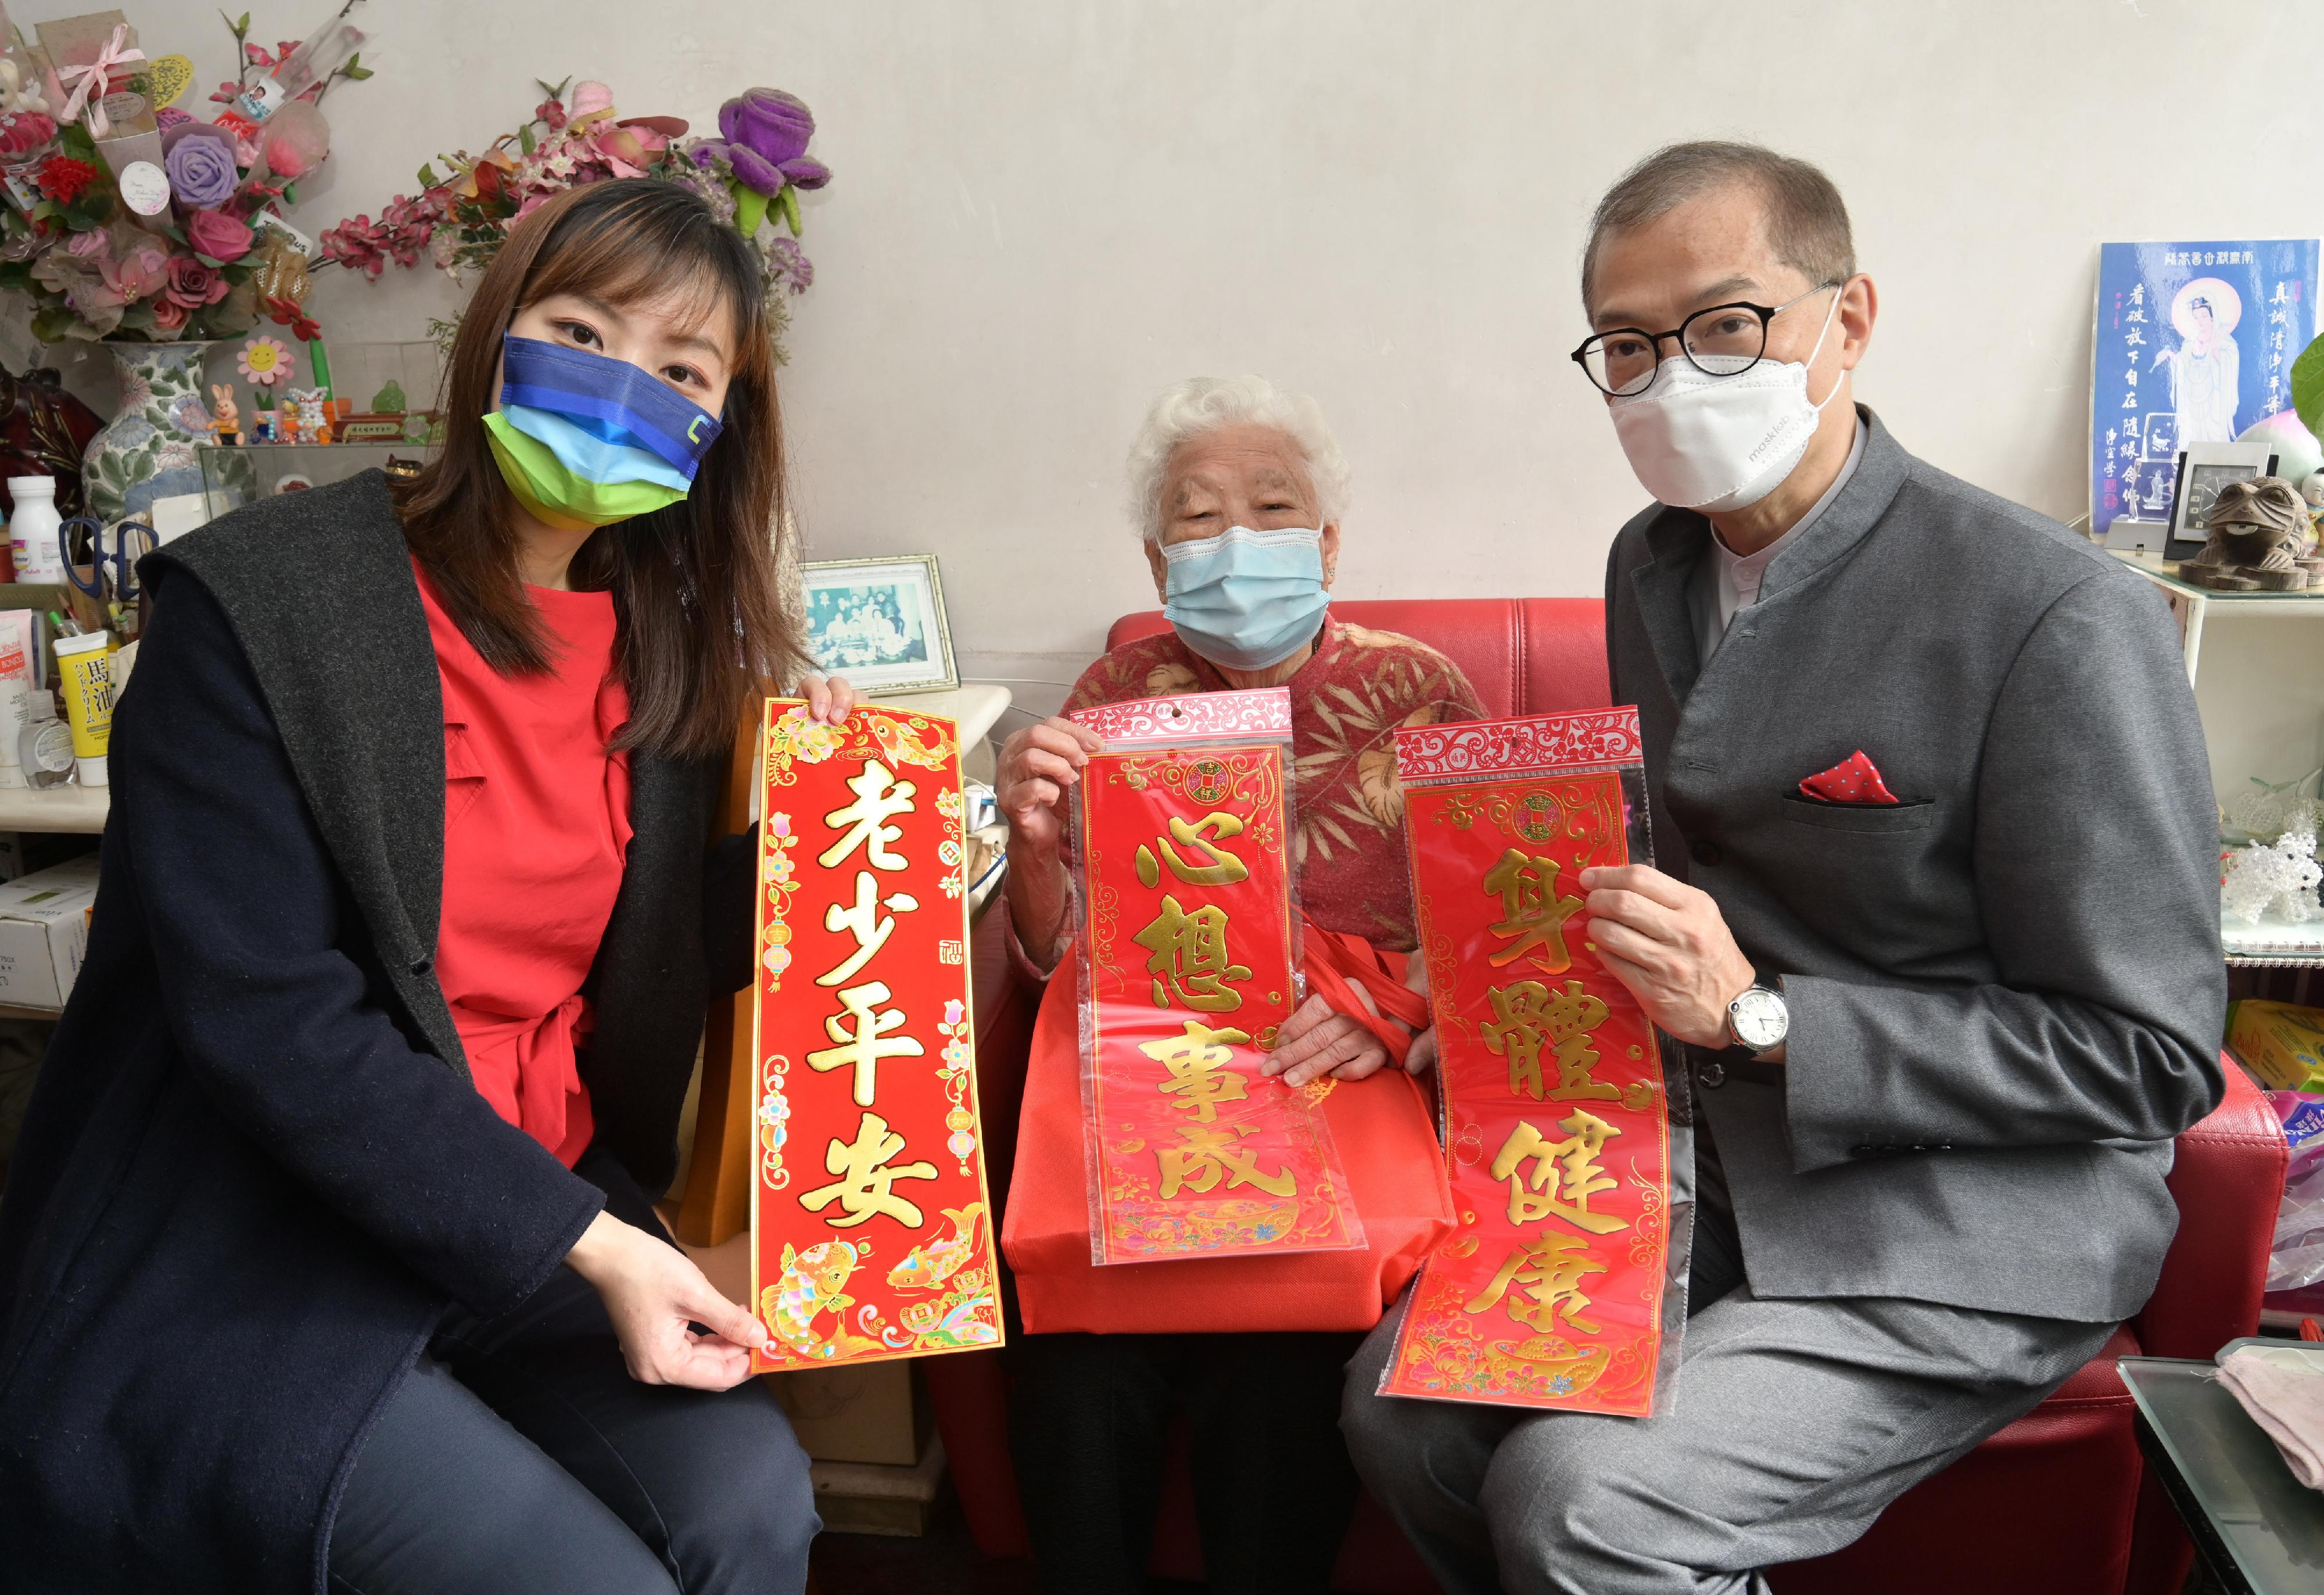 The Deputy Secretary for Justice, Mr Cheung Kwok-kwan, together with a number of the Principal Officials today (January 23) visited grass-roots families in Wong Tai Sin District to distribute blessing bags and celebrate Chinese New Year with them. Photo shows the Secretary for Health, Professor Lo Chung-mau (right) and the Acting Secretary for Innovation, Technology and Industry, Ms Lillian Cheong (left) presenting gifts to a senior and extending seasonal greetings to them on behalf of the Government.